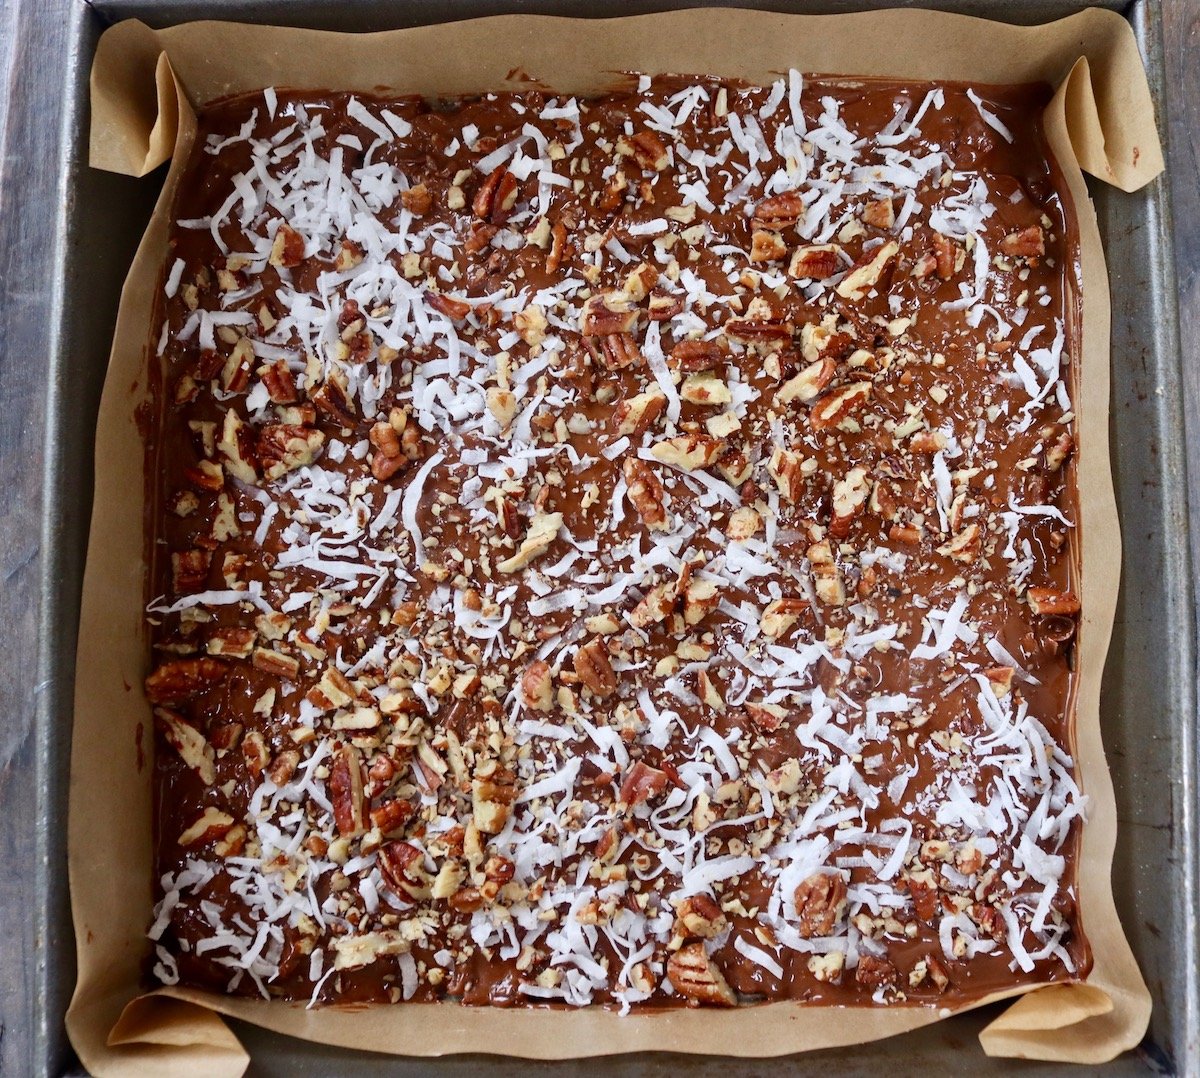 Chocolate coconut and pecan pieces in a parchment paper-lined square baking pan.